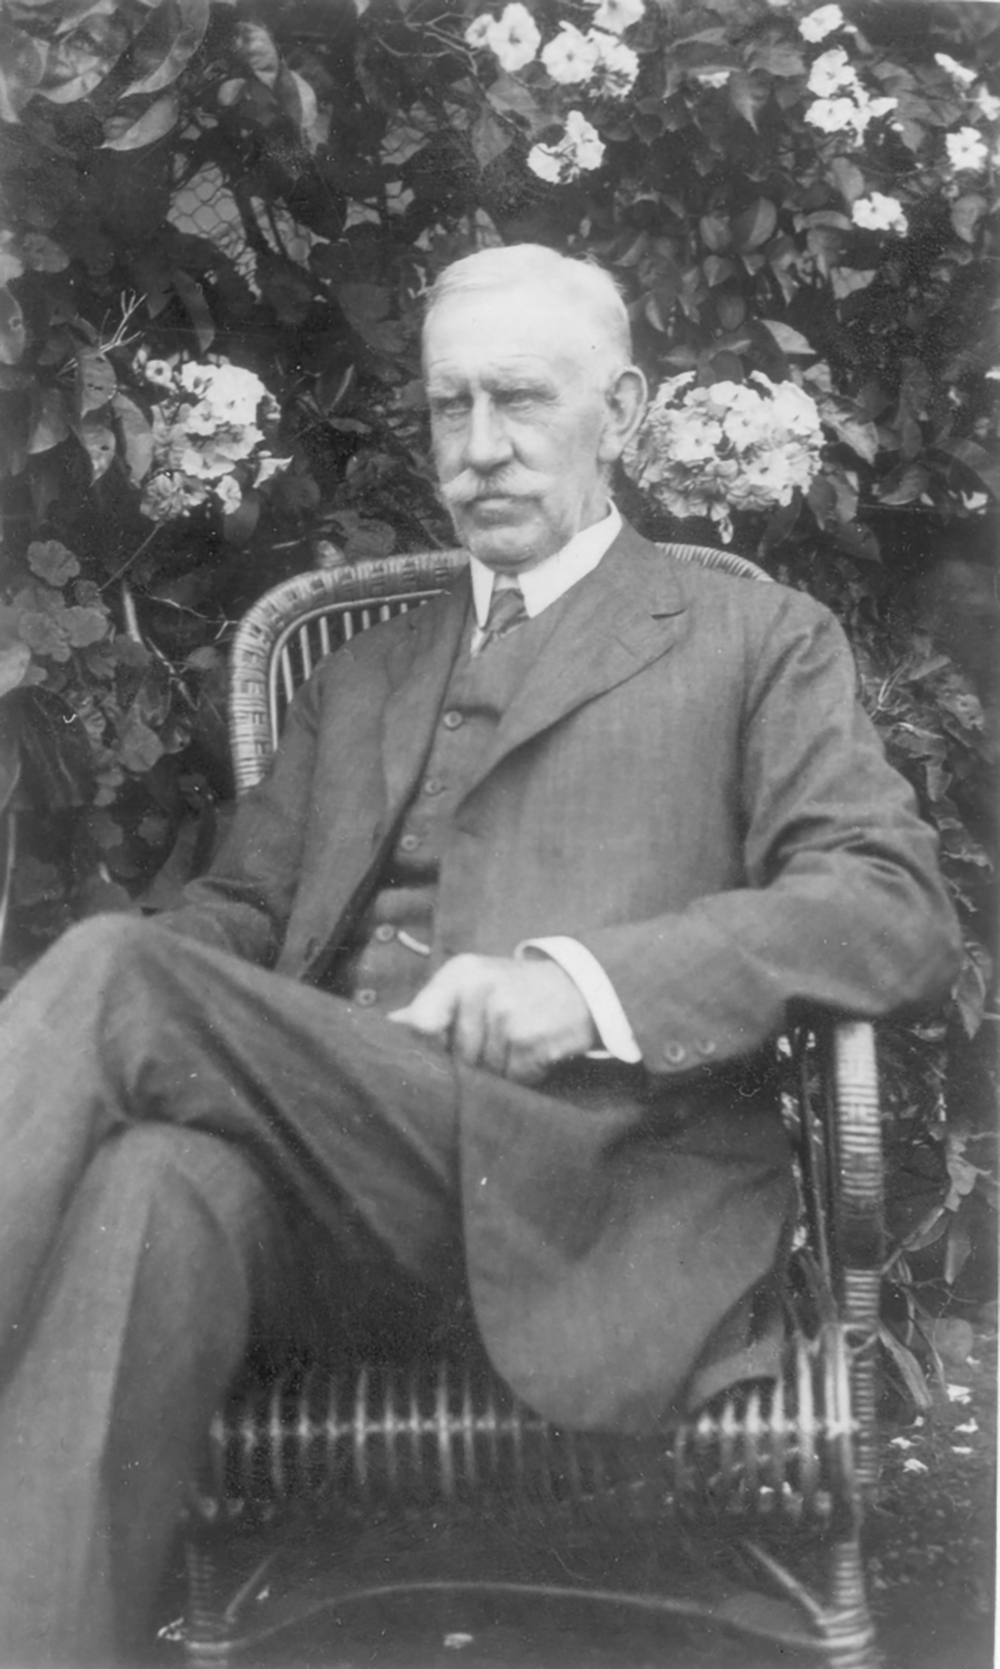 Image 3 of 7 - Black and white portrait of a man in a suit sitting on a chair outside with leaves and flowers behind him.